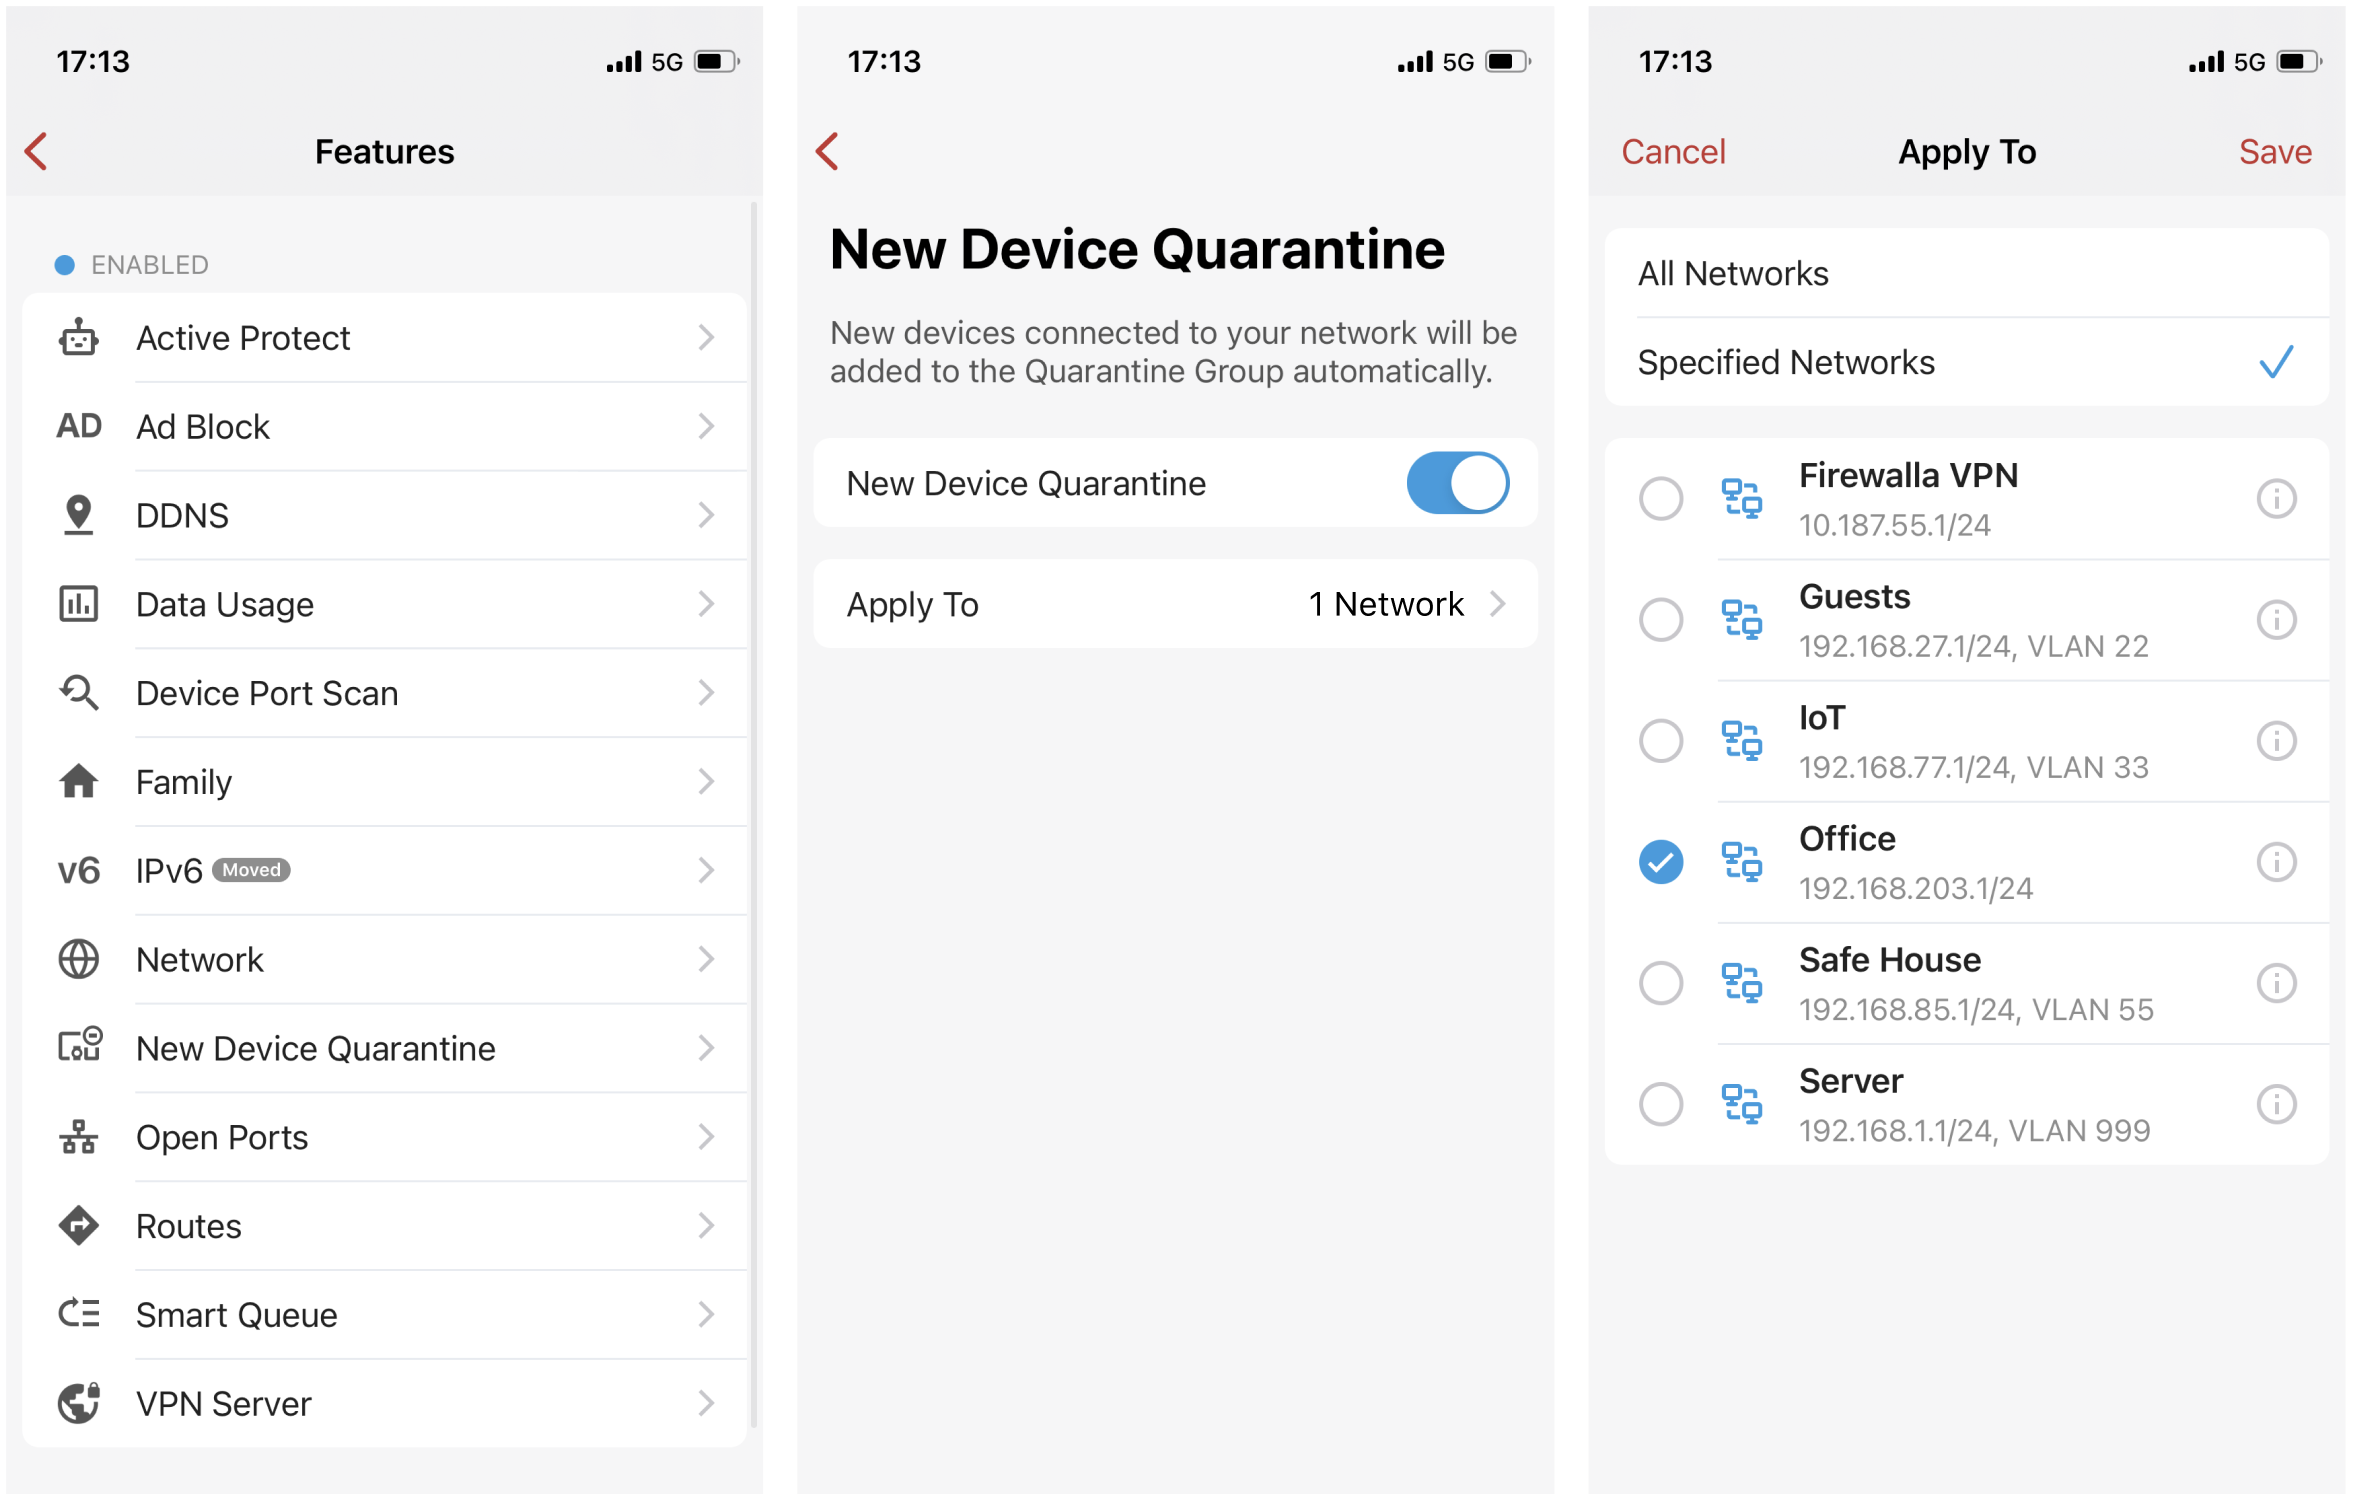 Select the new device quarantine, activate the new device quarantine option and apply to select networks